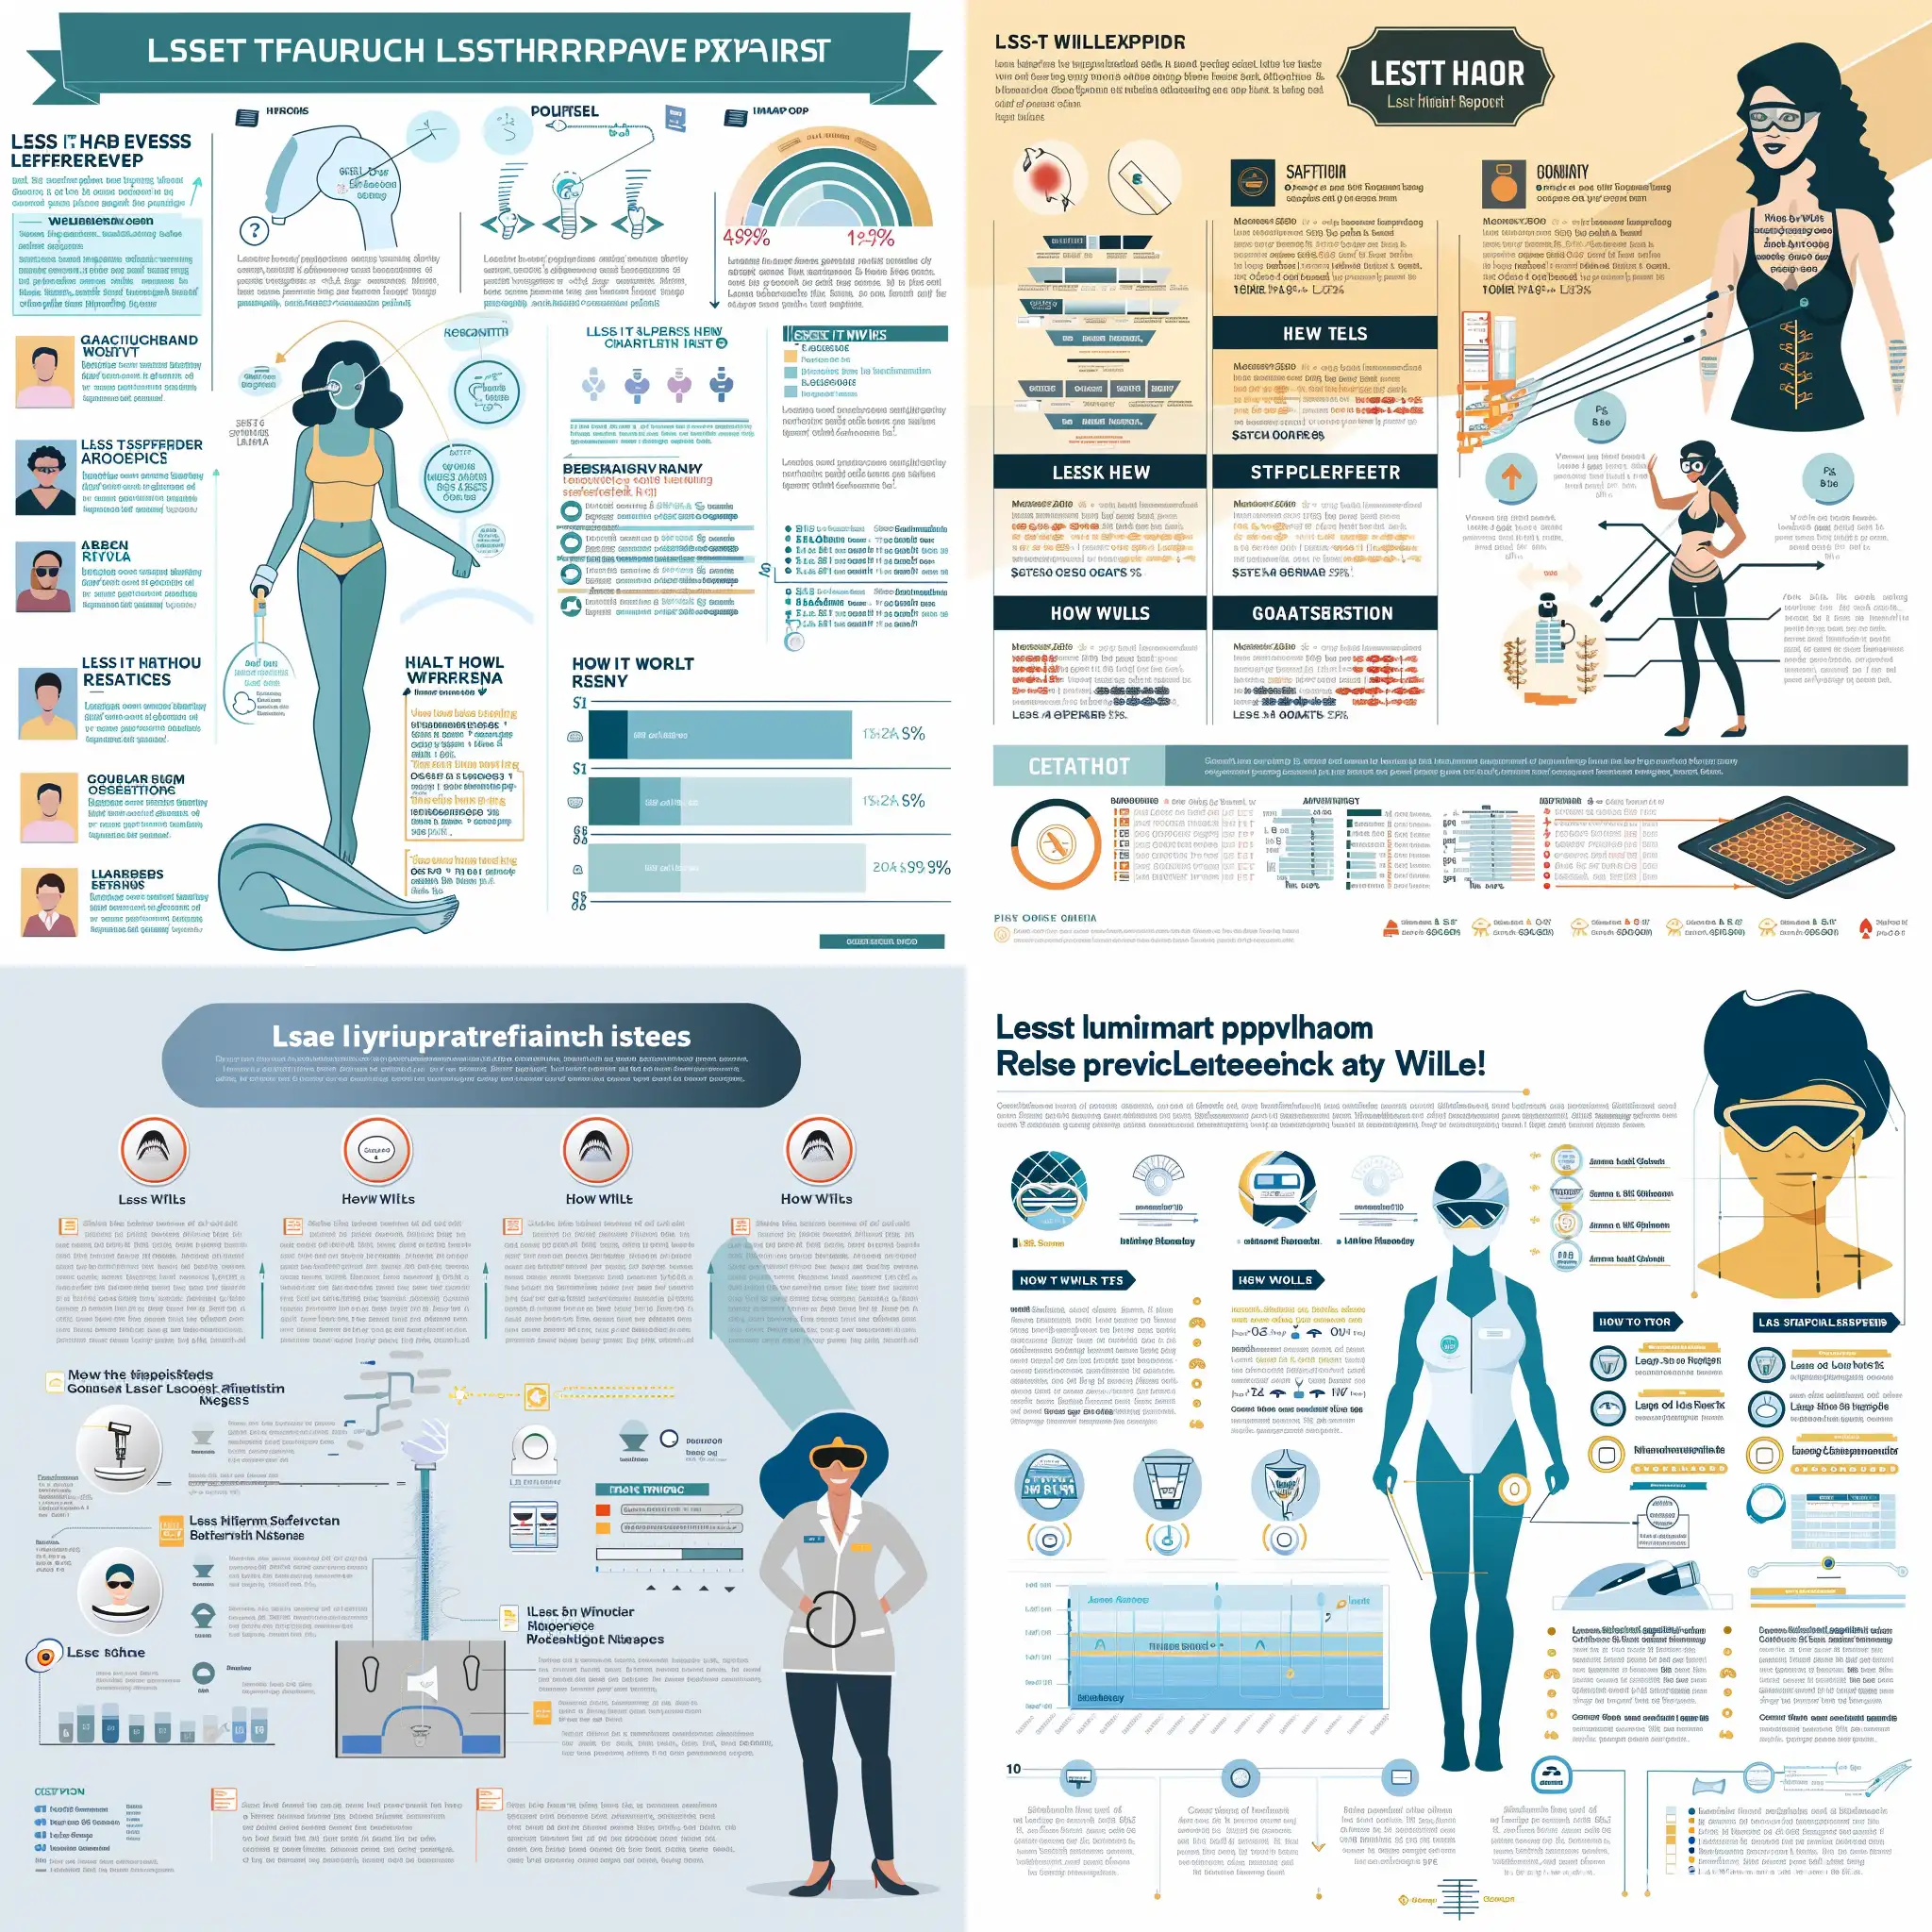 /imagine prompt: An infographic explaining "Laser Hair Removal" for face, underarms, arms, legs, bikini area, back, chest, and abdomen. Outline the science, safety standards, and patient satisfaction rates. Use patient journey maps, safety certification icons, and a global satisfaction chart. Include a 'How It Works' section with step-by-step visuals of the process. Created Using: Scientific illustration style, patient journey mapping, certified iconography, step-by-step procedural visuals, clear data charts, engaging narrative flow --ar 1:1 --v 6.0